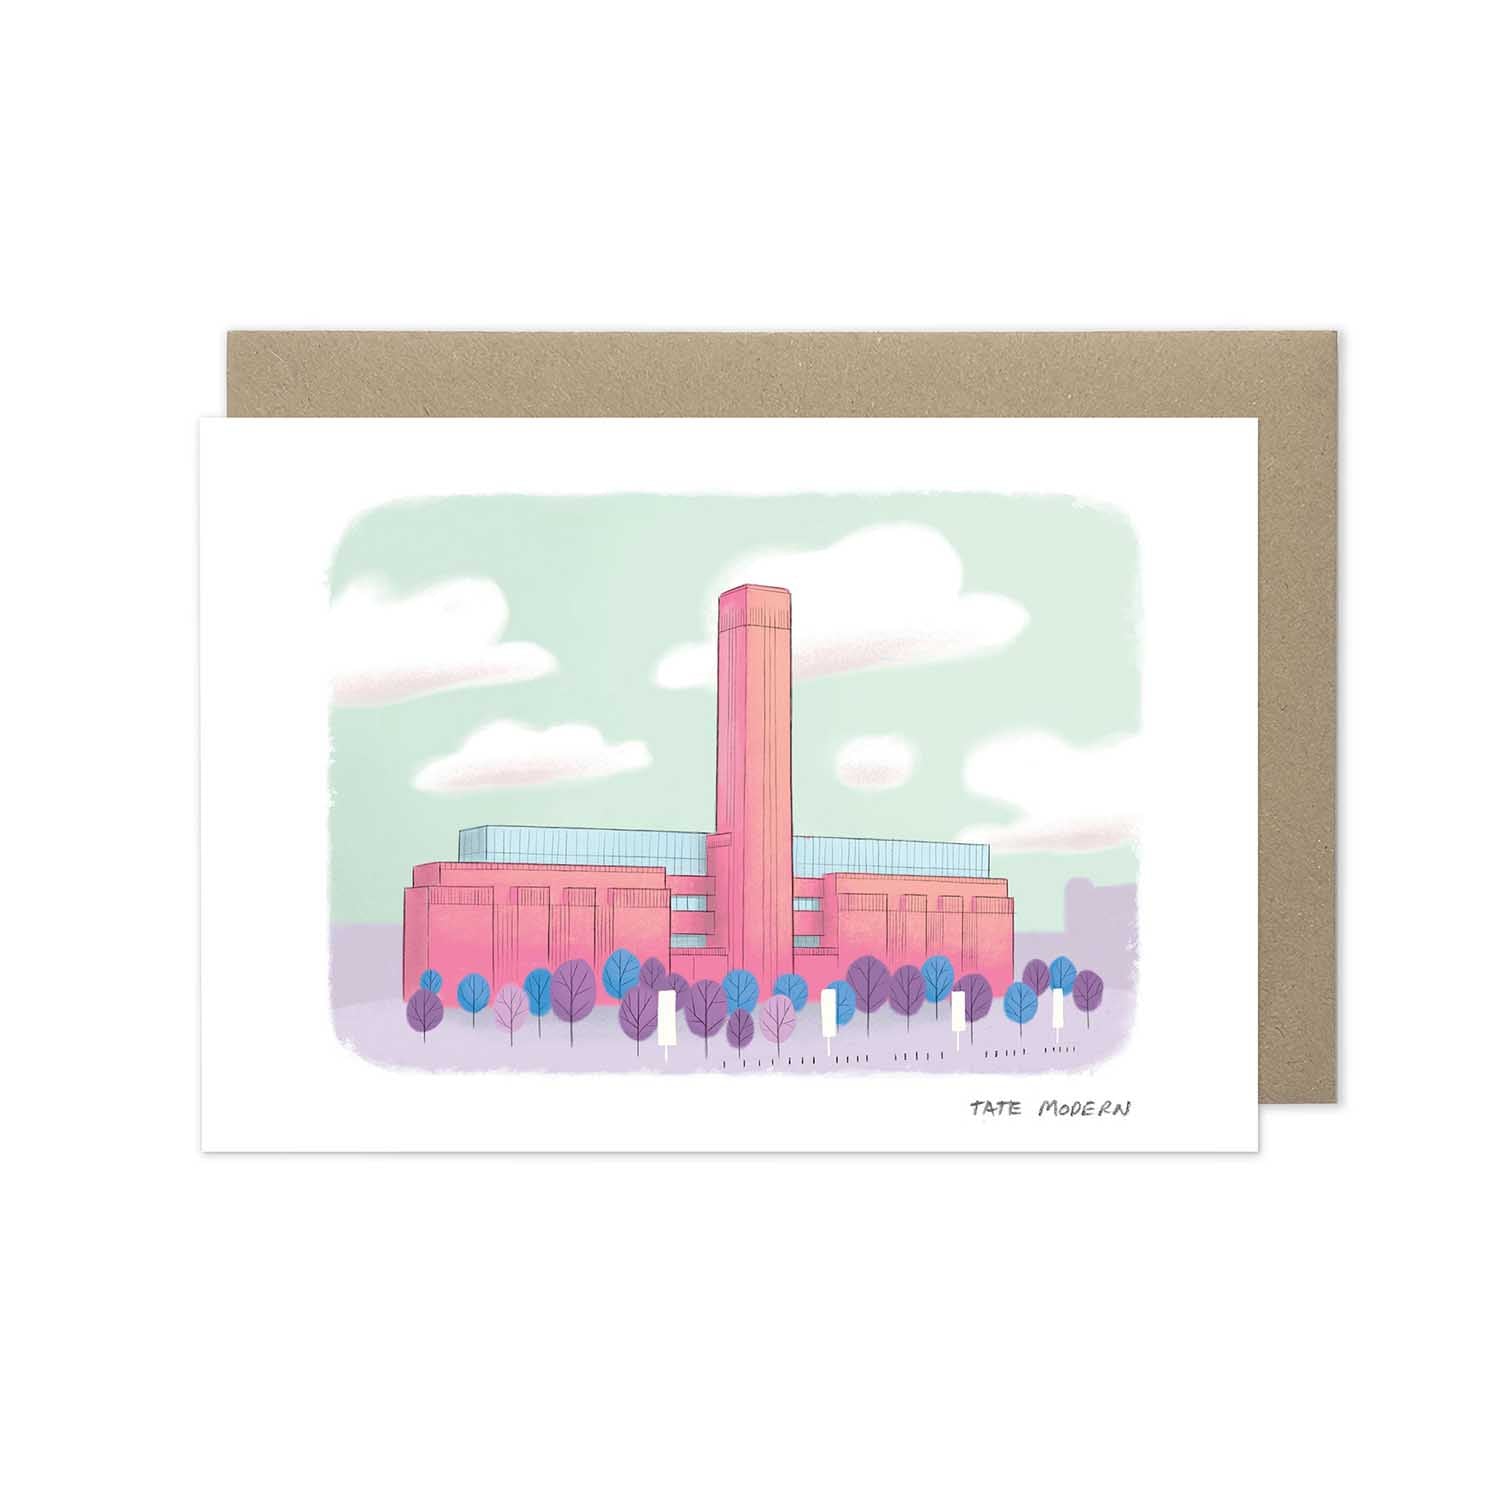 London's Tate Modern beautifully illustrated on a greeting card by mike green illustration.